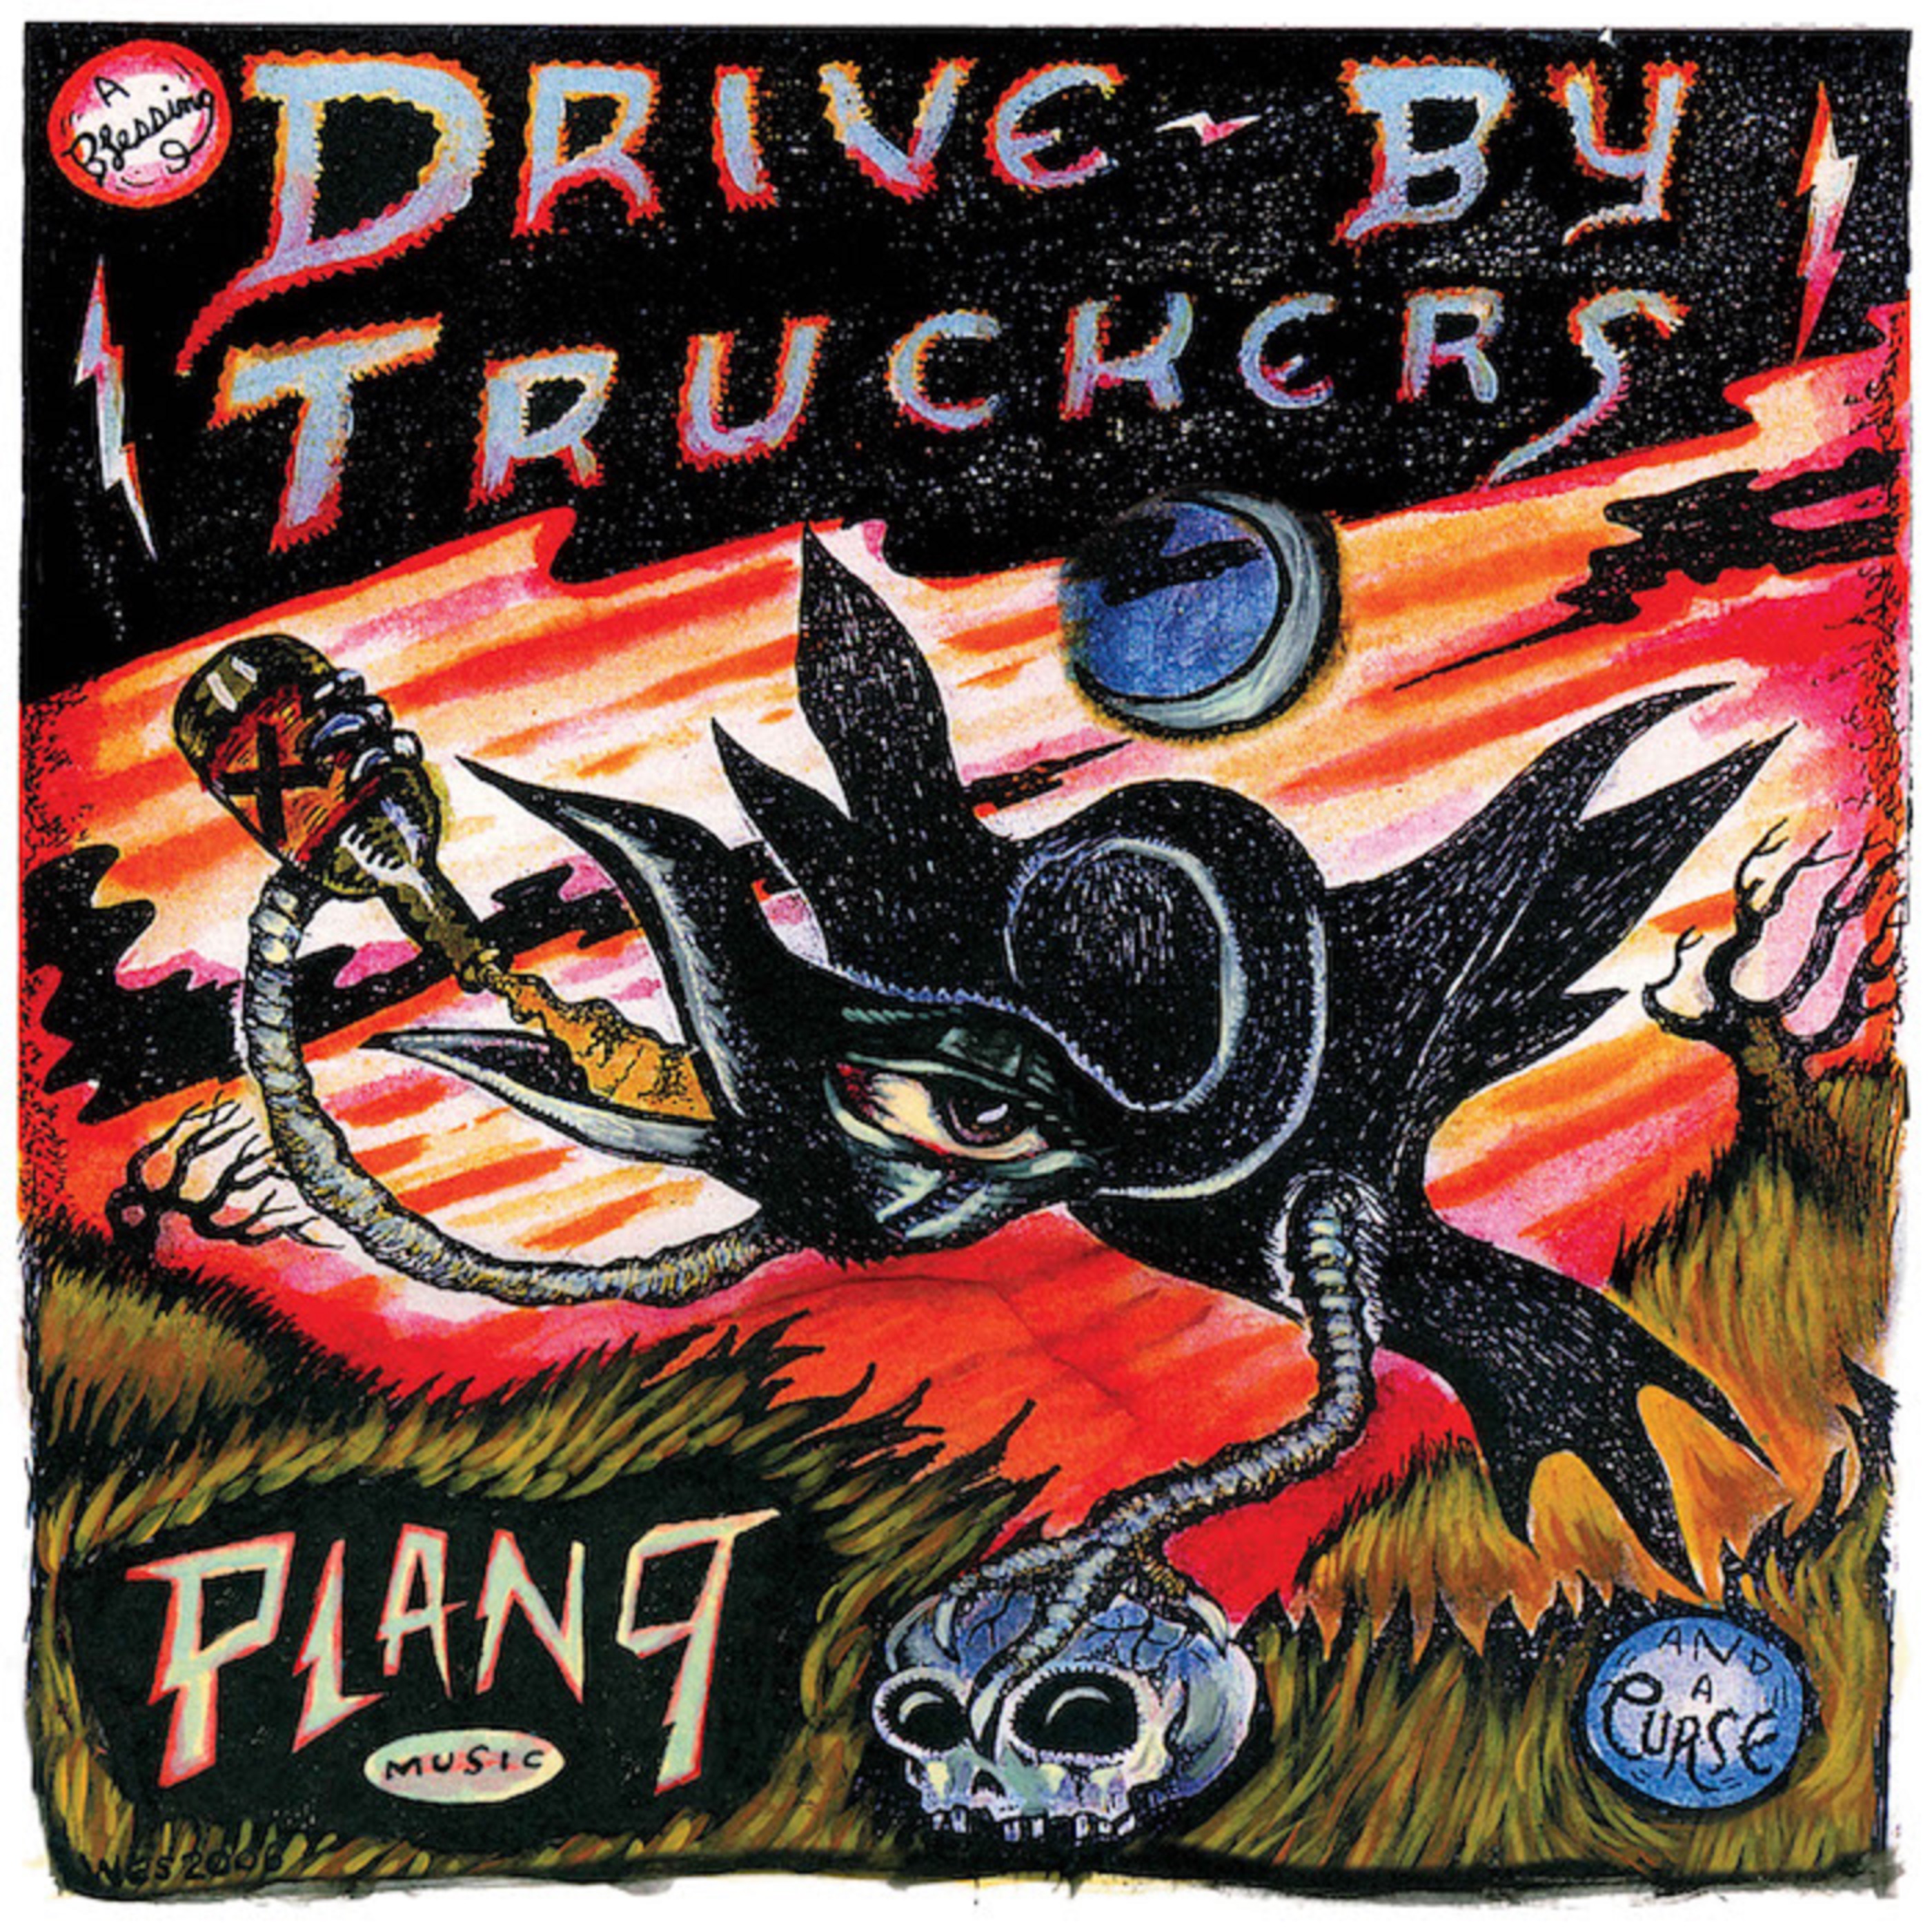 Drive-By Truckers Release "Plan 9 Records July 13th, 2006" Tomorrow